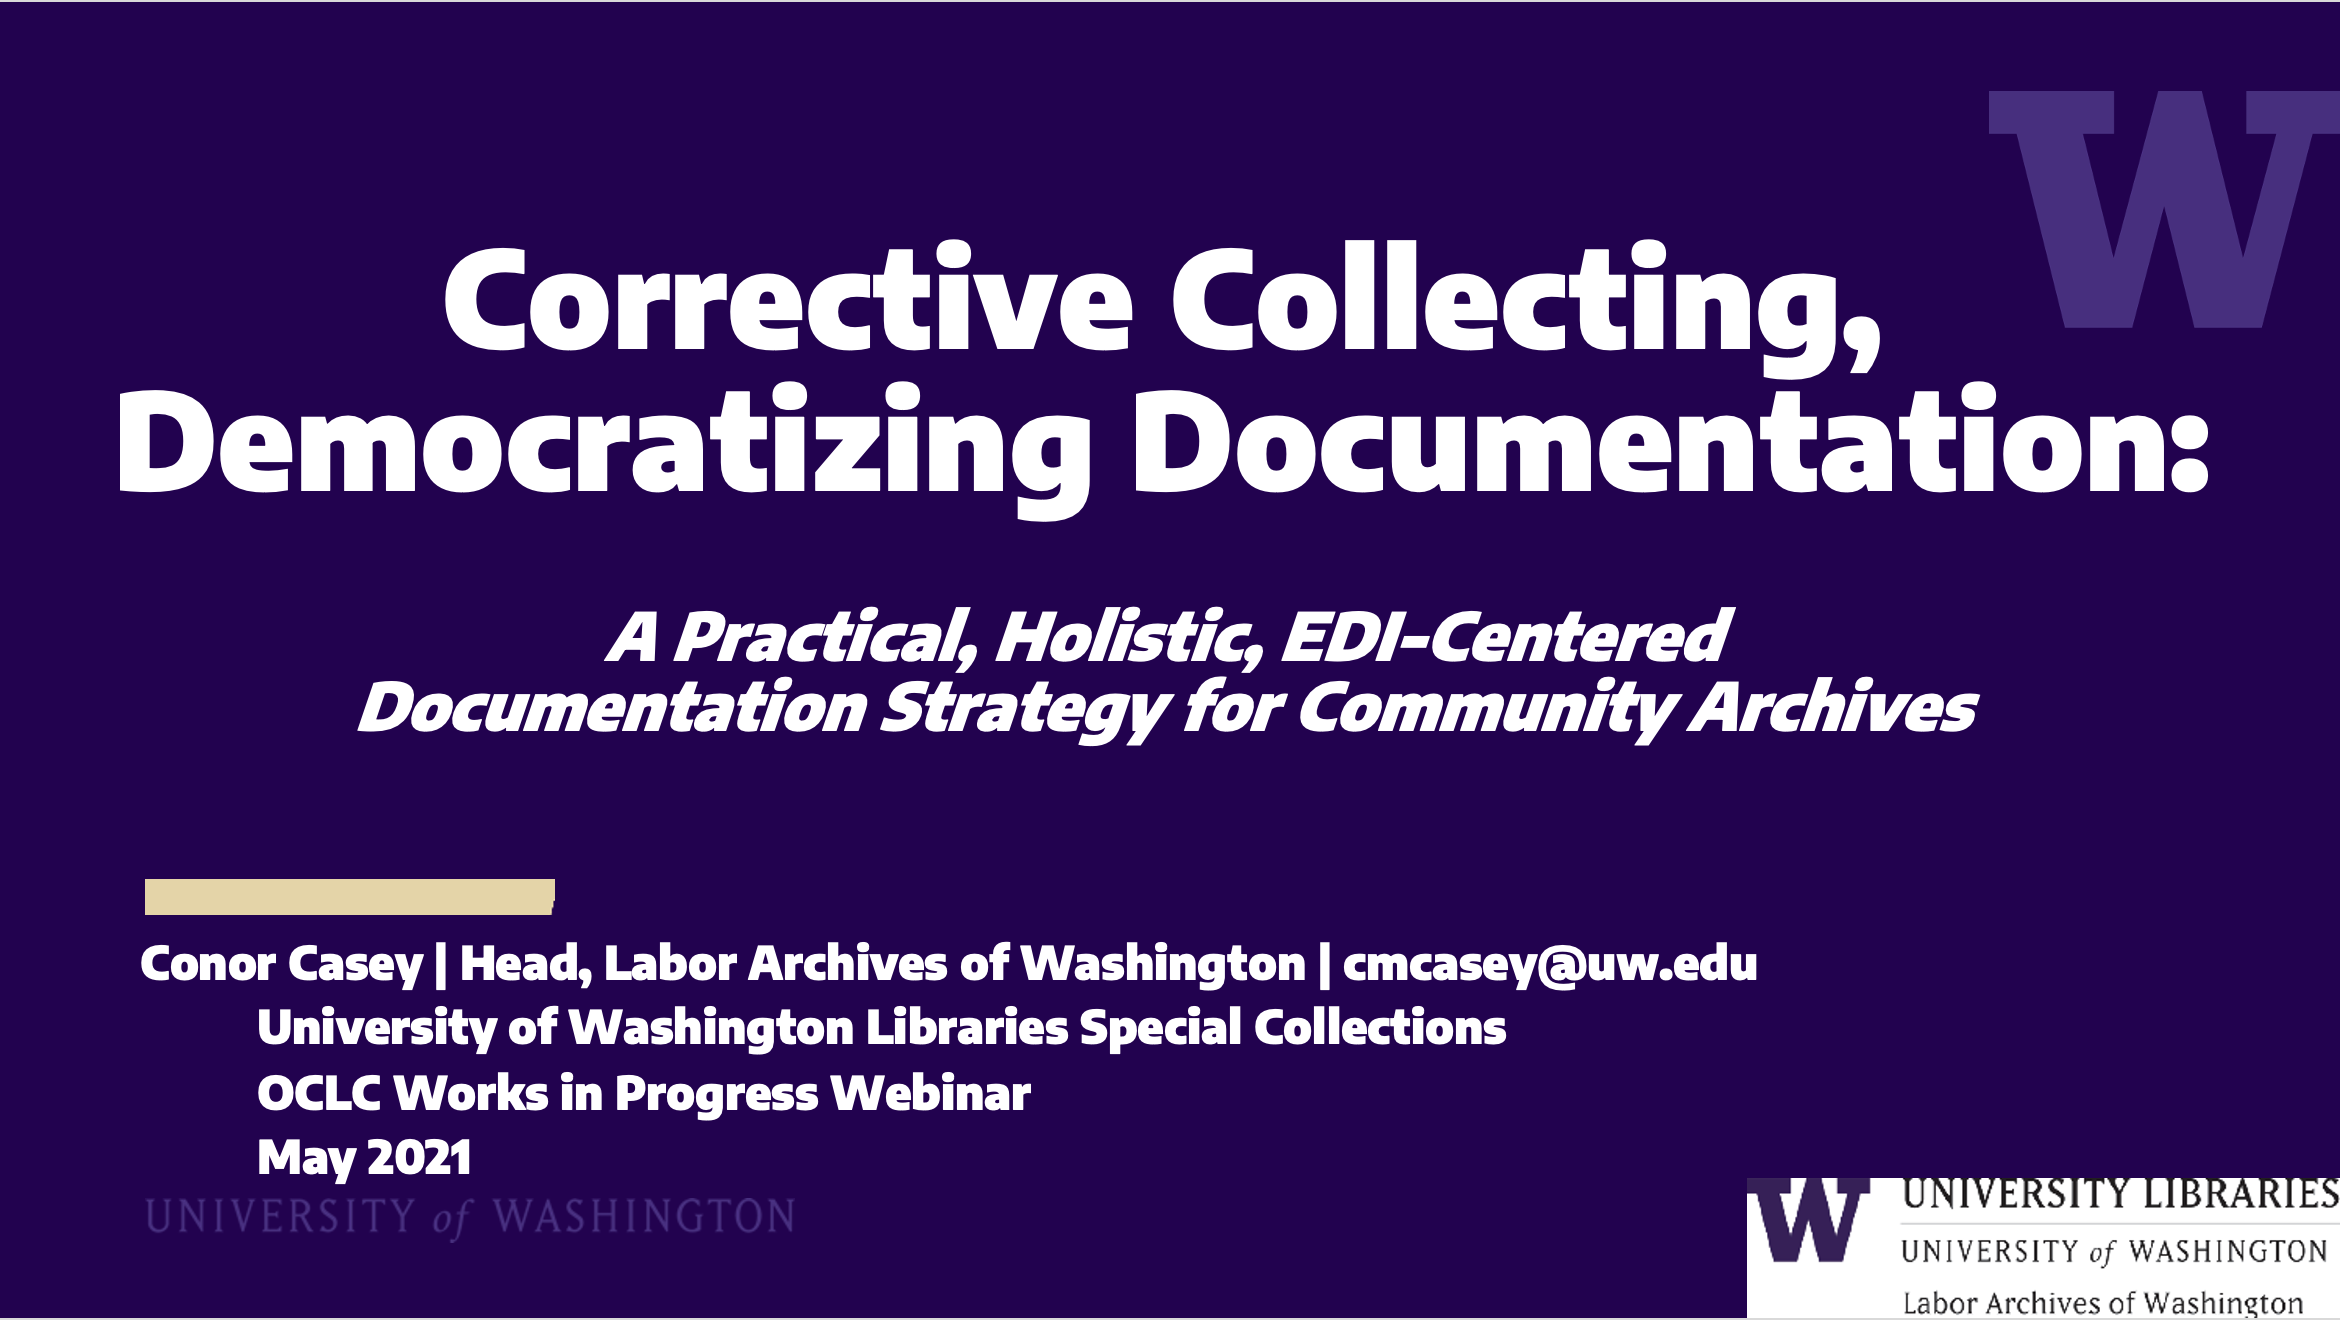 Corrective collecting: A practical, holistic, EDI-centered strategy for community archives